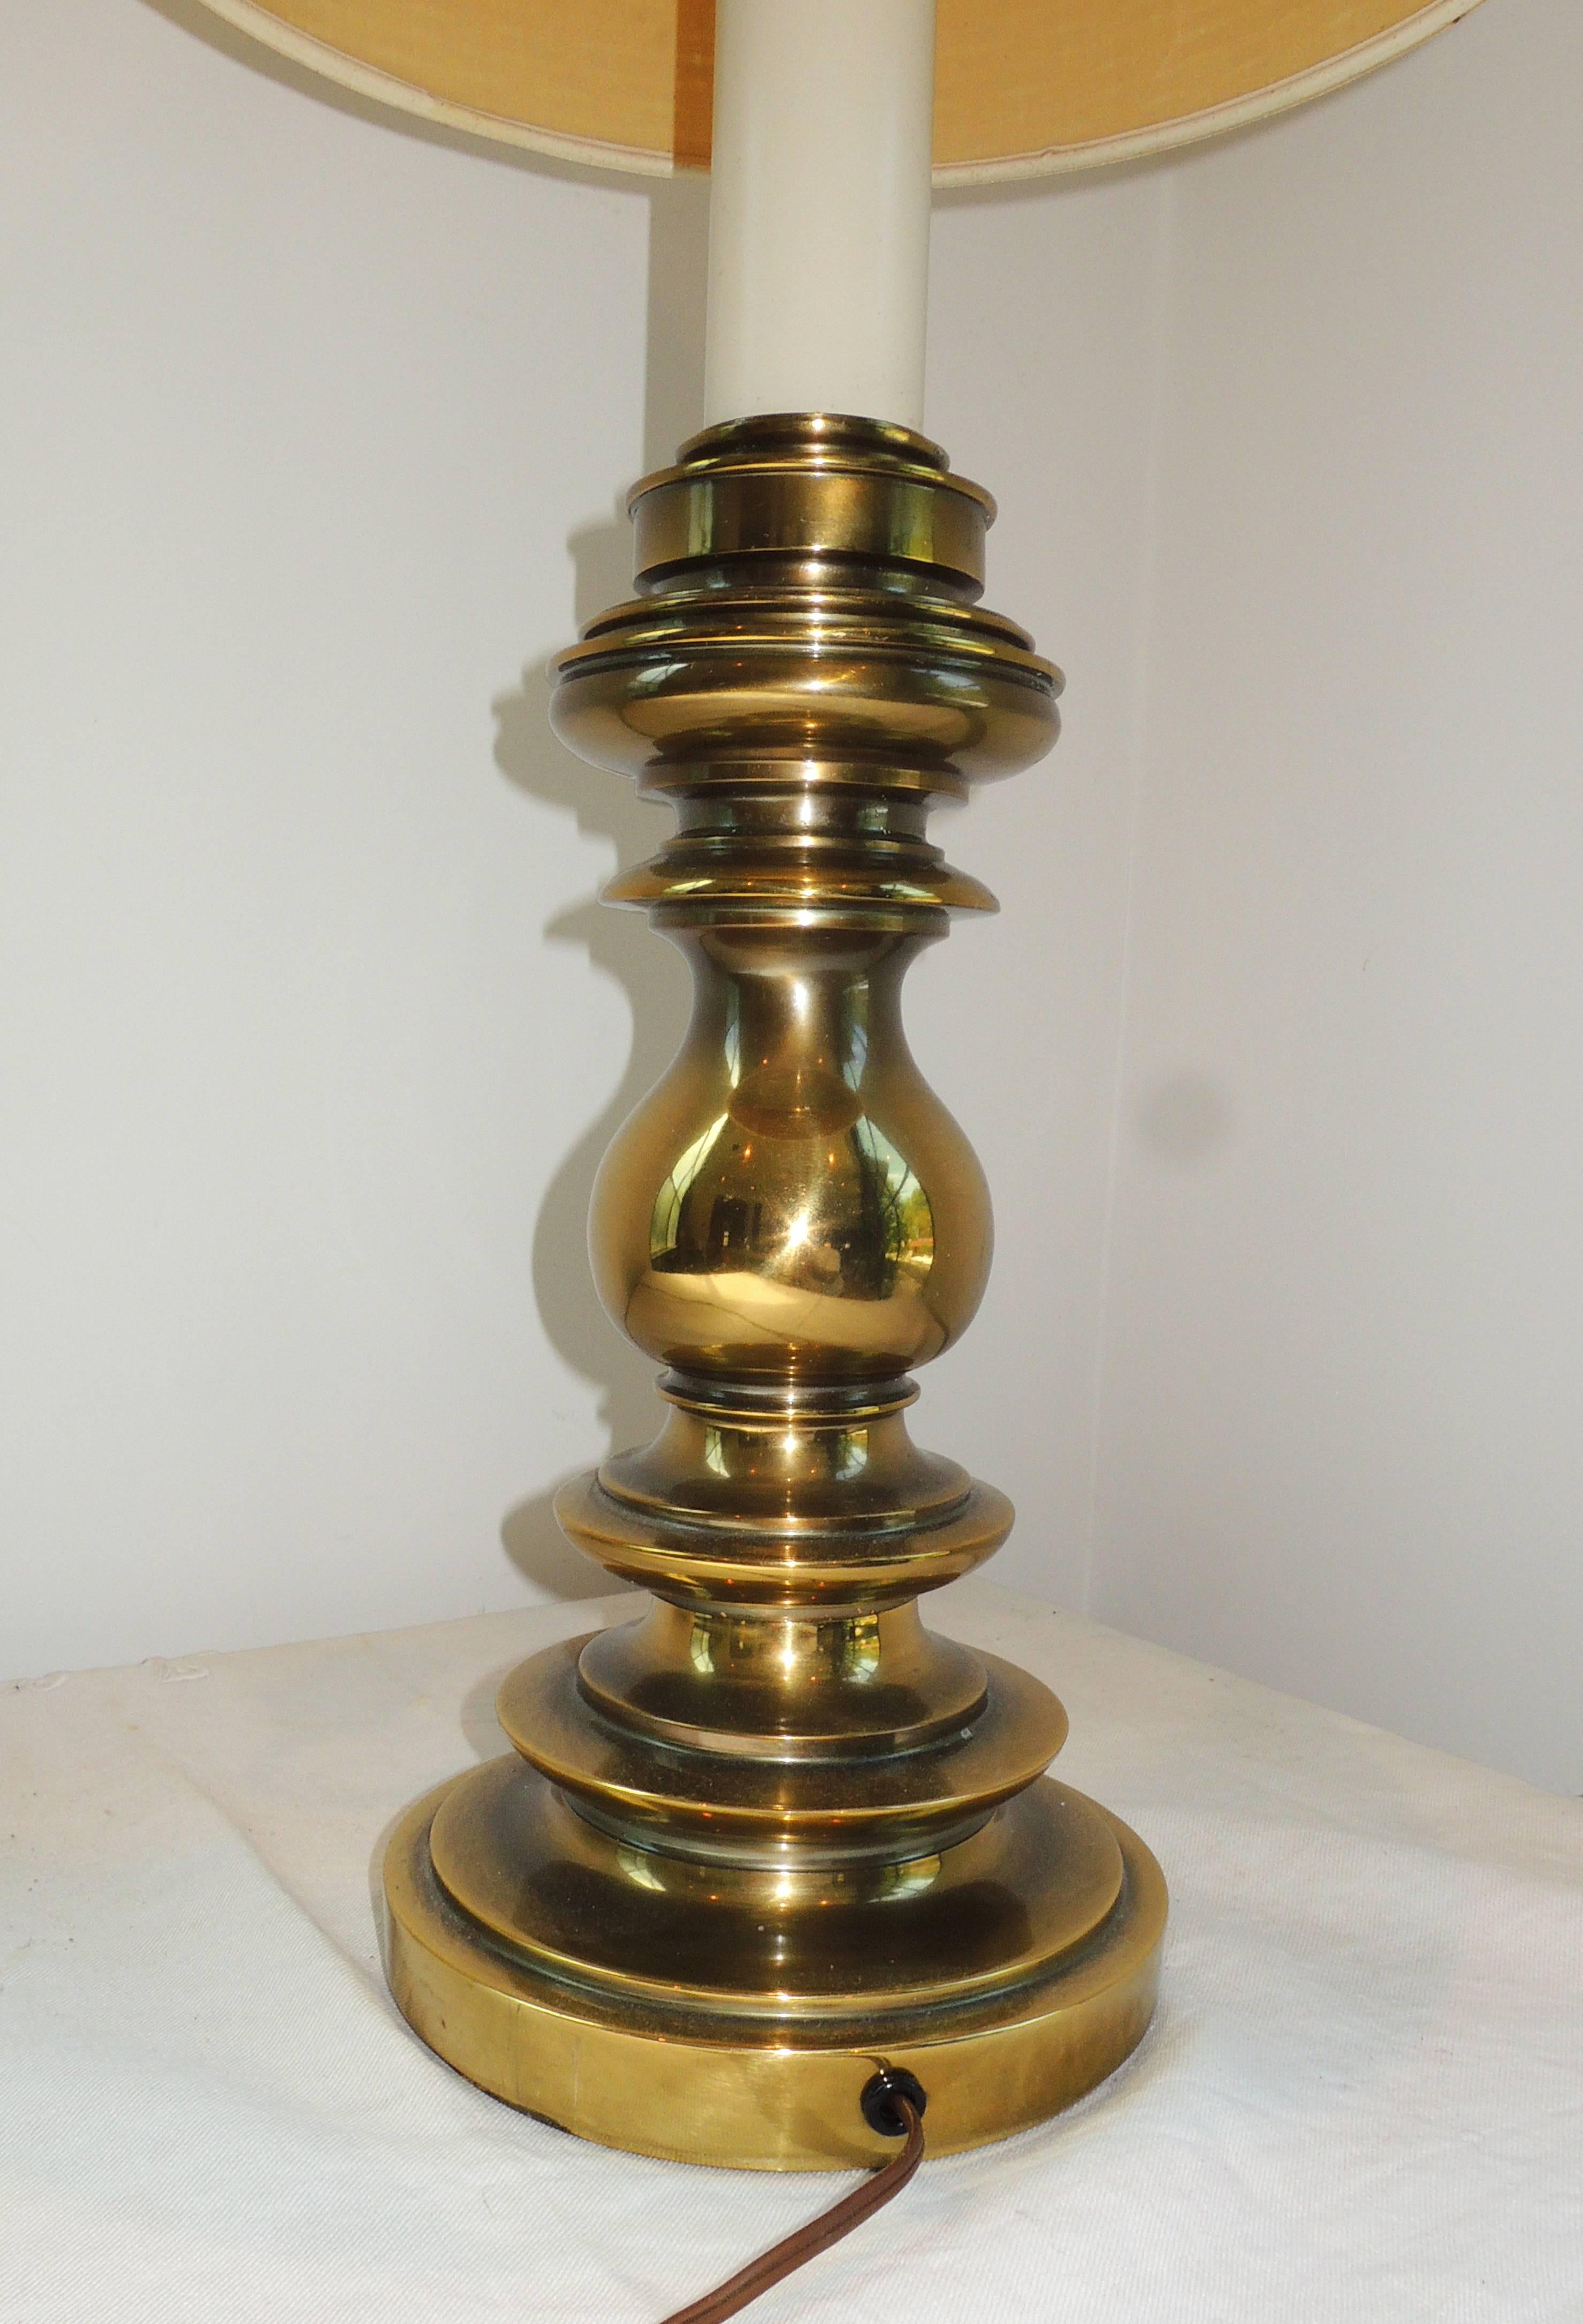 Brass Candlestick Stiffel Table Lamp In Excellent Condition For Sale In Washington, DC